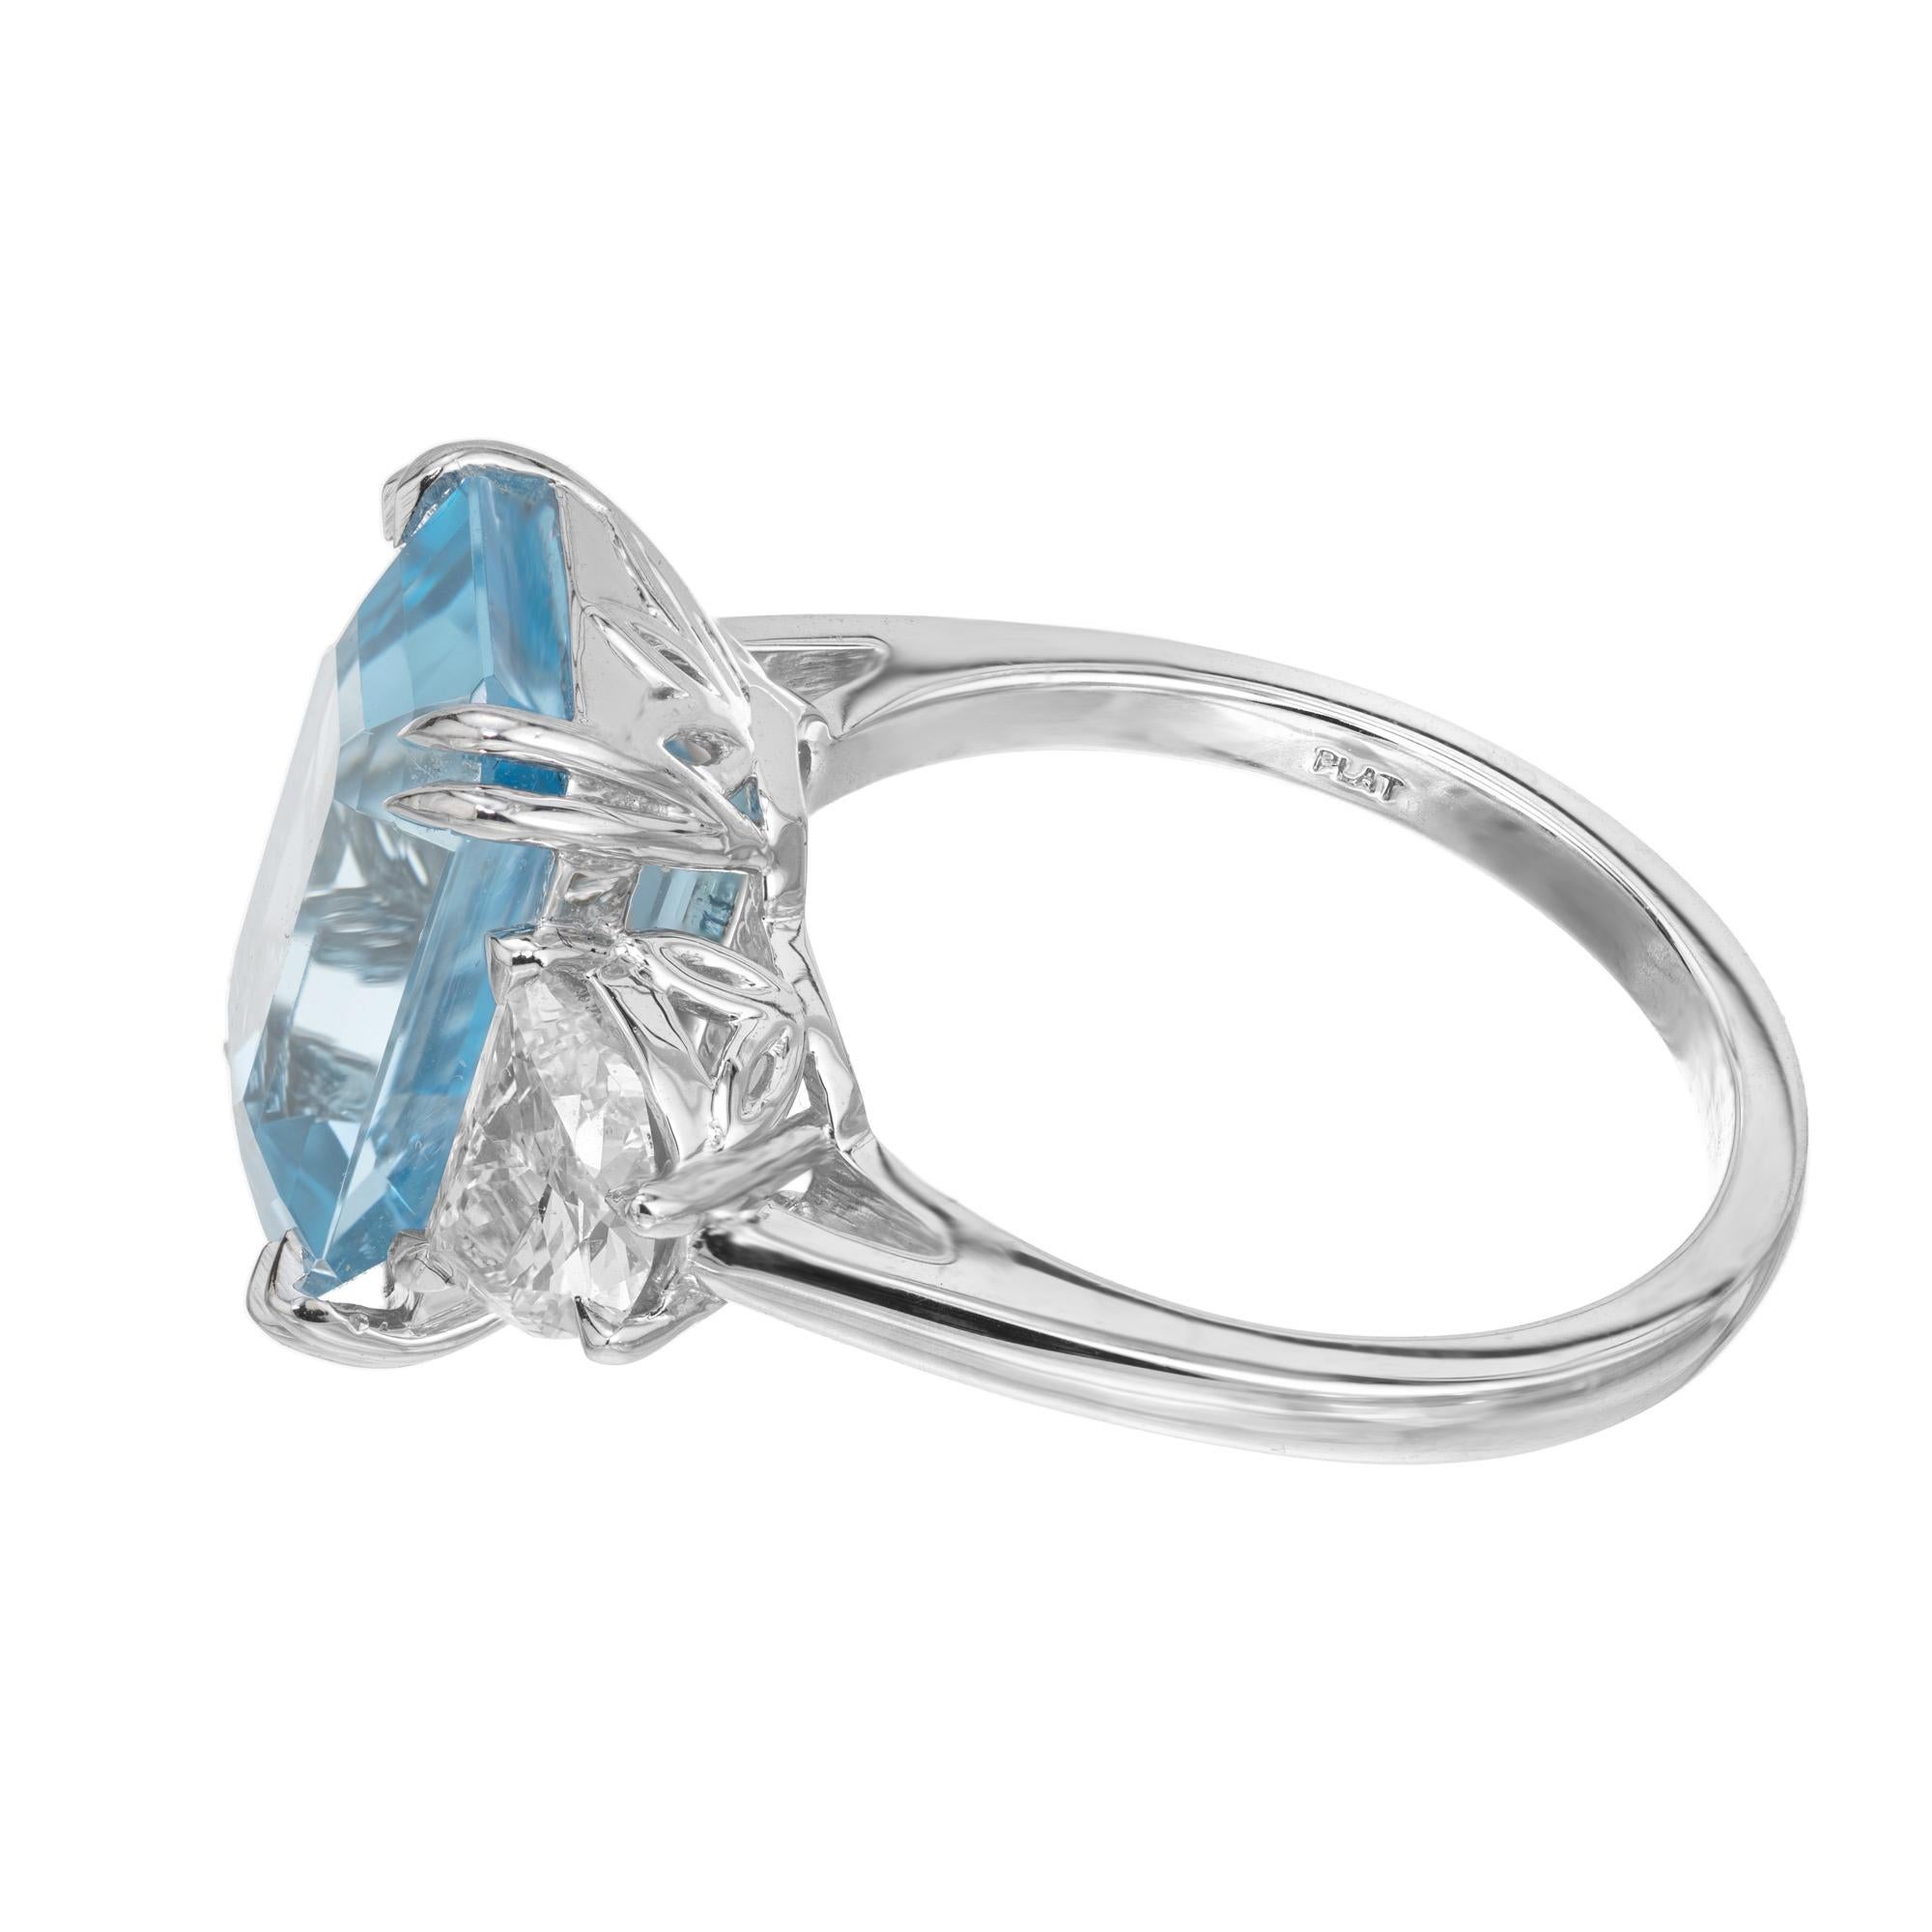  Peter Suchy 7.44 Carat Aqua Diamond Platinum Three-Stone Engagement Ring In New Condition For Sale In Stamford, CT